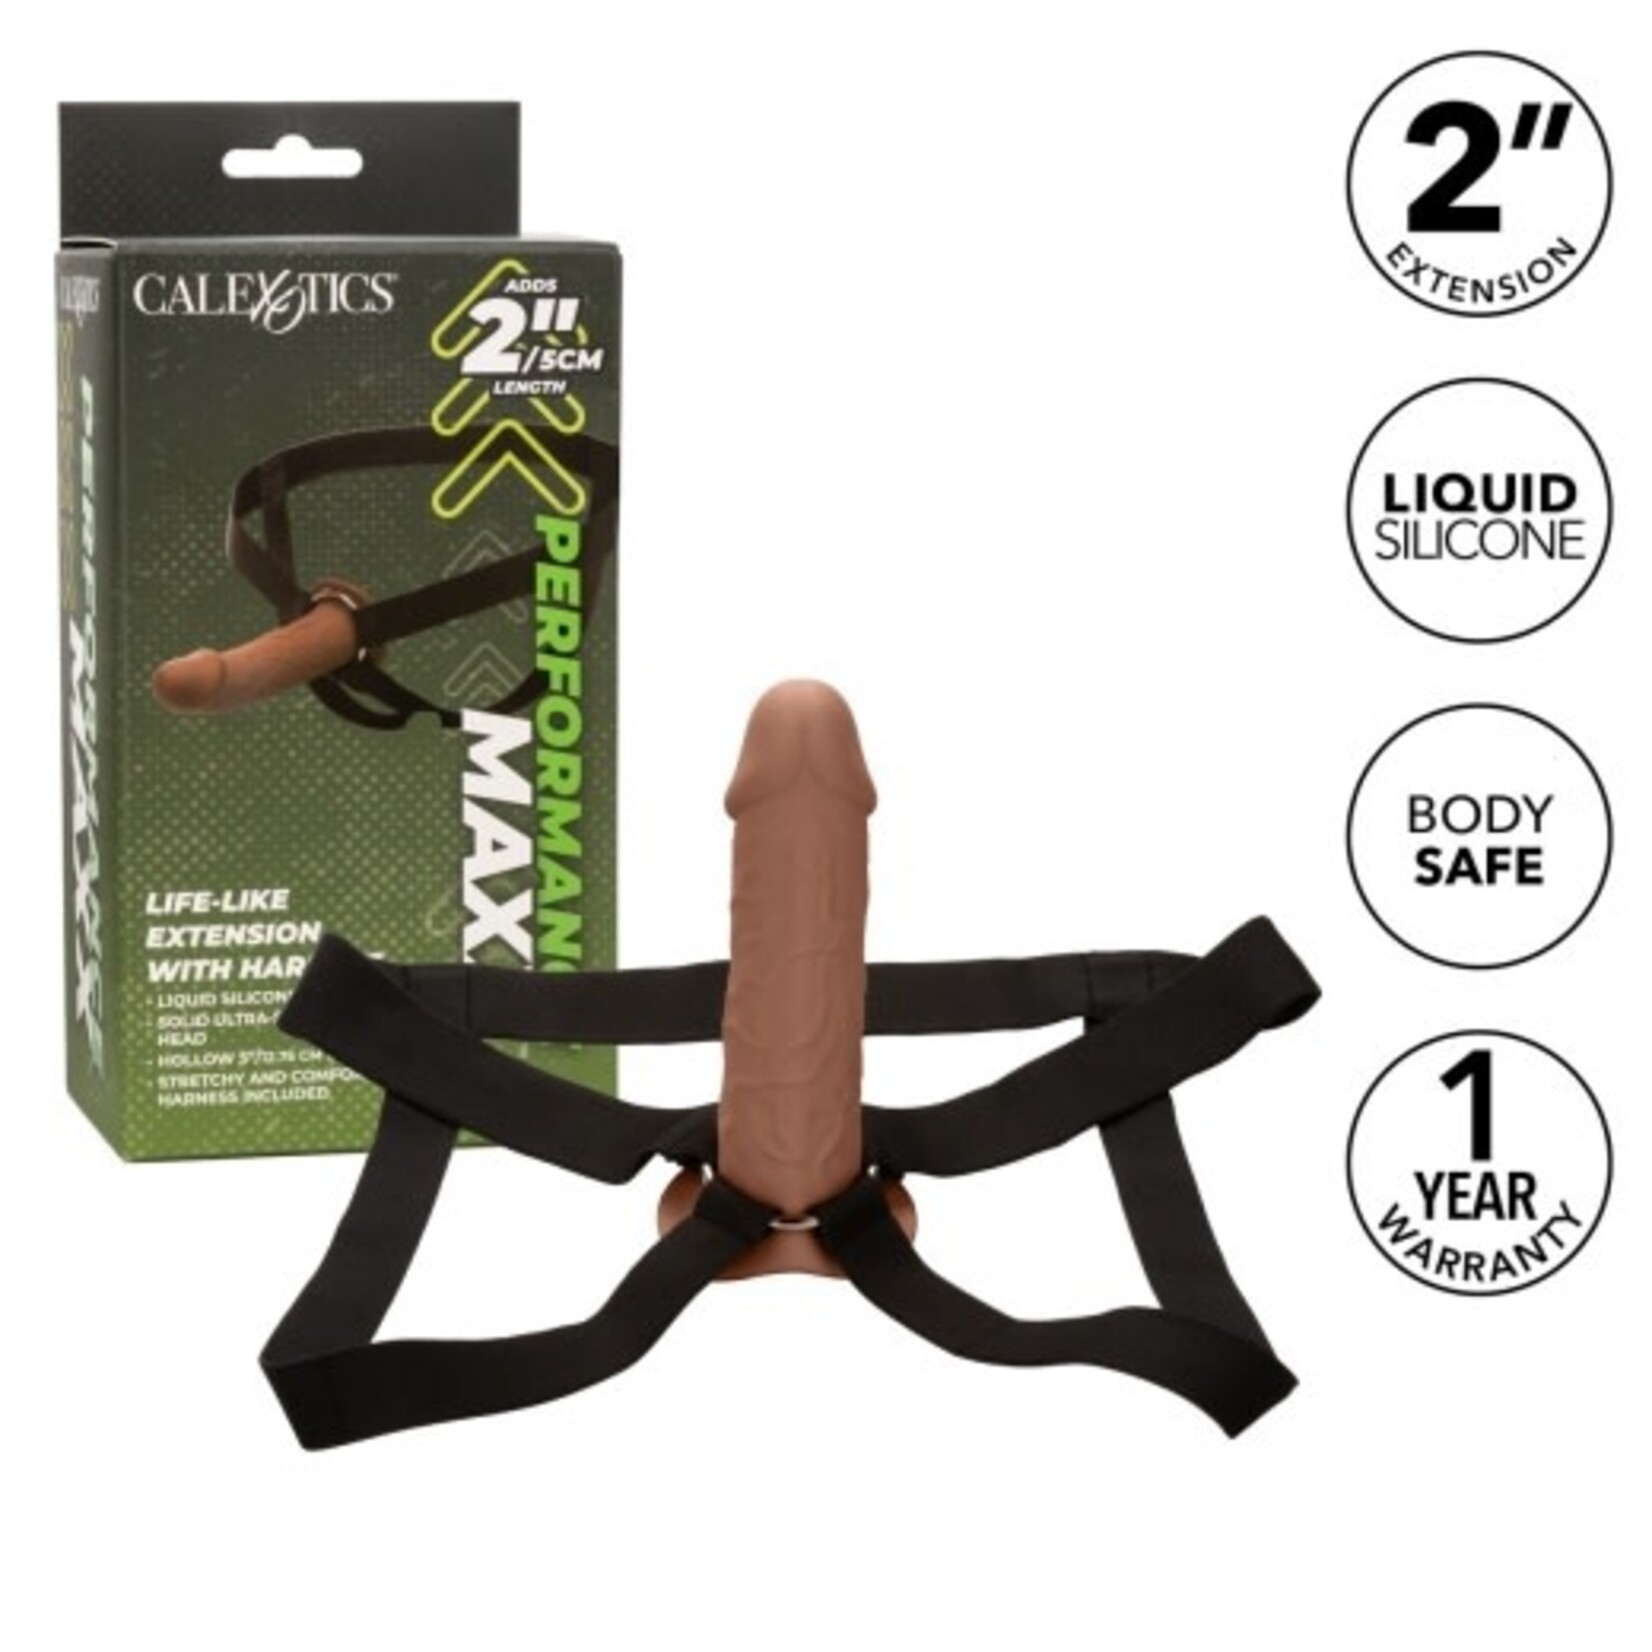 CALEXOTICS PERFORMANCE MAXX LIFE-LIKE EXTENSION WITH HARNESS - BROWN